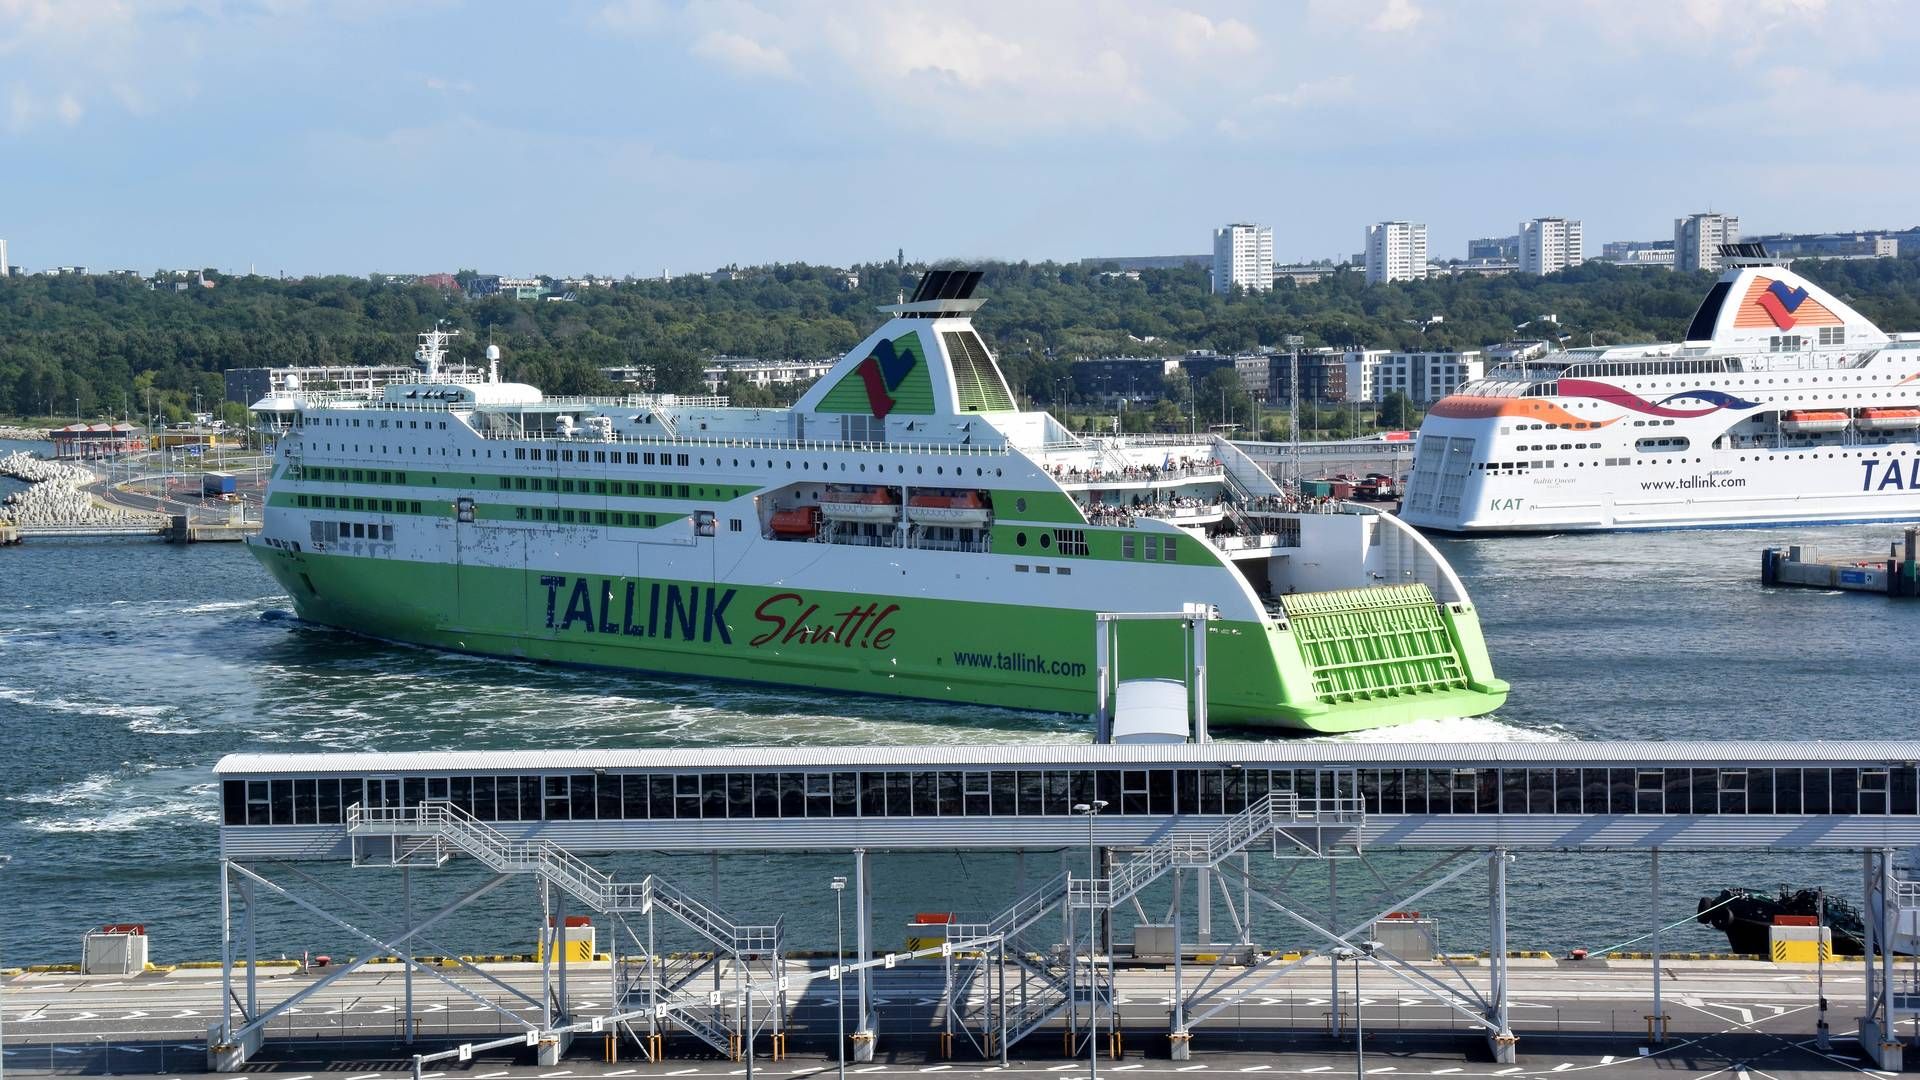 ”It is important that the connection between Helsinki and Tallinn is environmentally even more sustainable in the future. More than the mandatory steps need to be taken to ensure that,” says Valdo Kalm, CEO of the Port of Tallinn. | Photo: Holger Hollemann/AP/Ritzau Scanpix